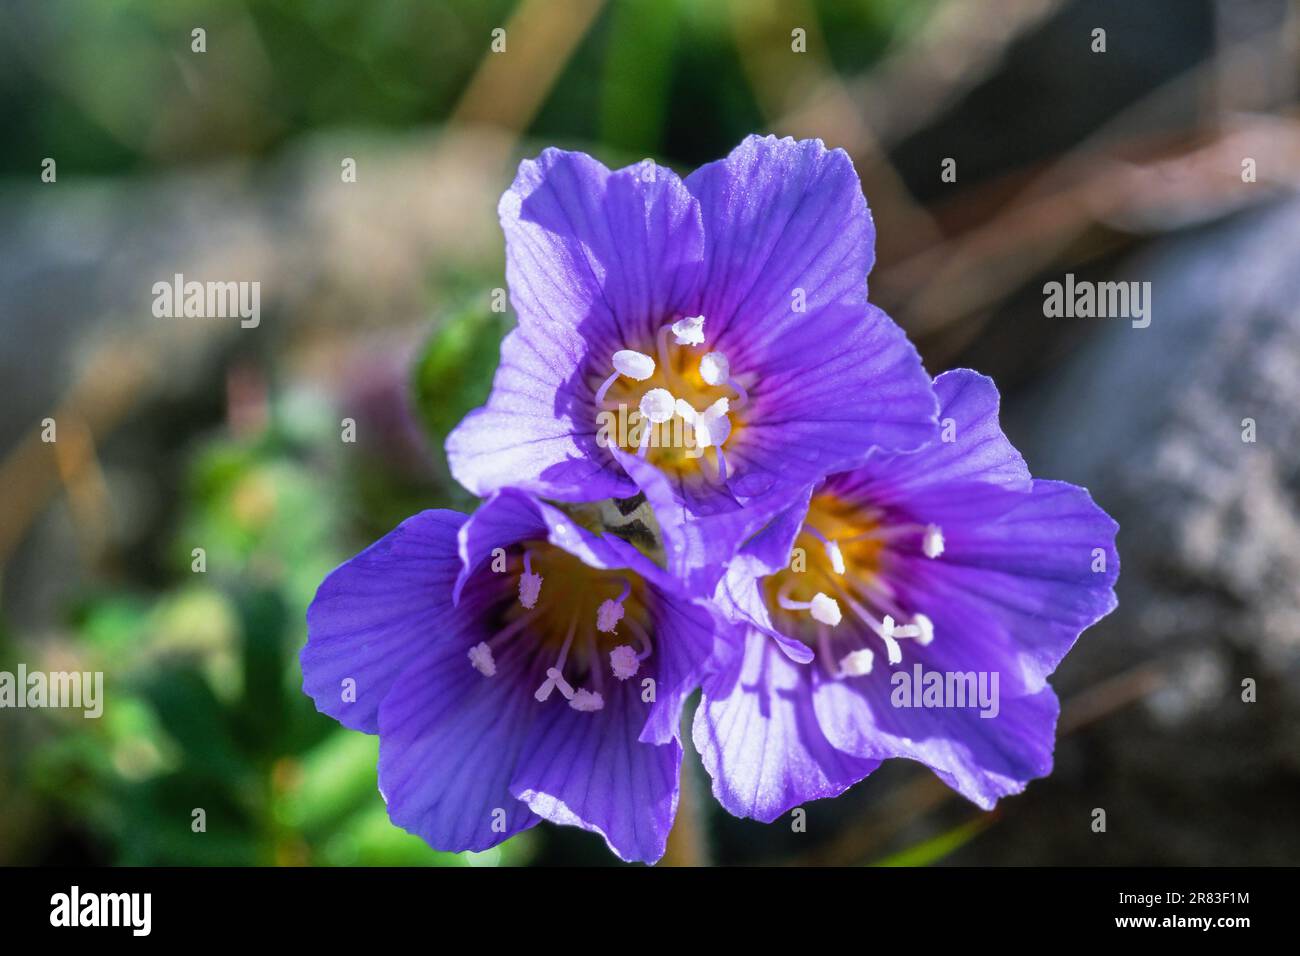 Close up at flowering Northern jacob's-ladder flowers Stock Photo